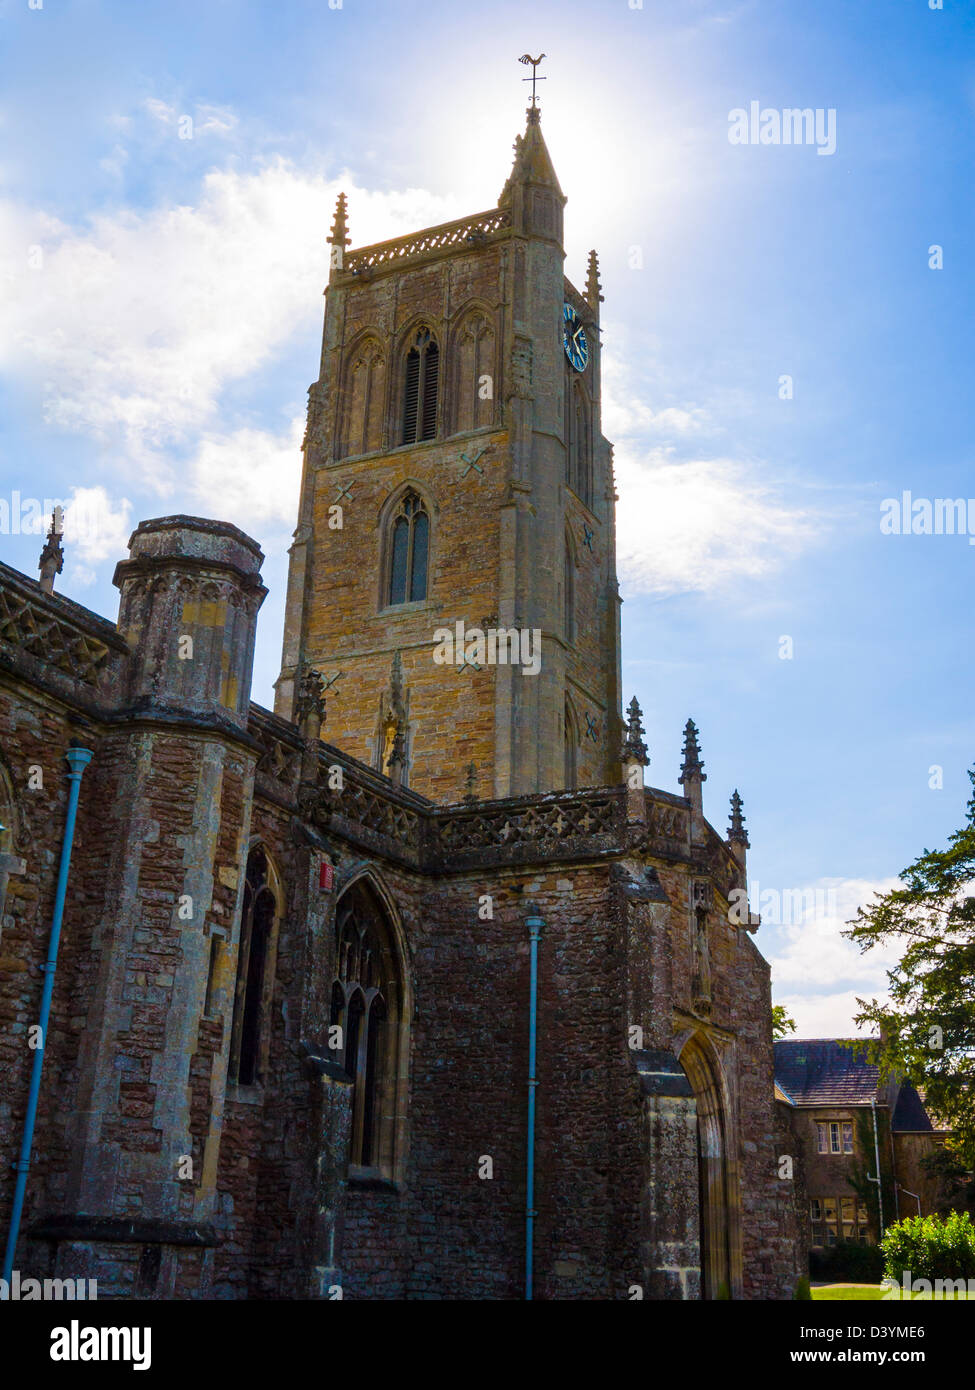 The Church of St Andrew in the village of Cheddar, Somerset, England. Stock Photo